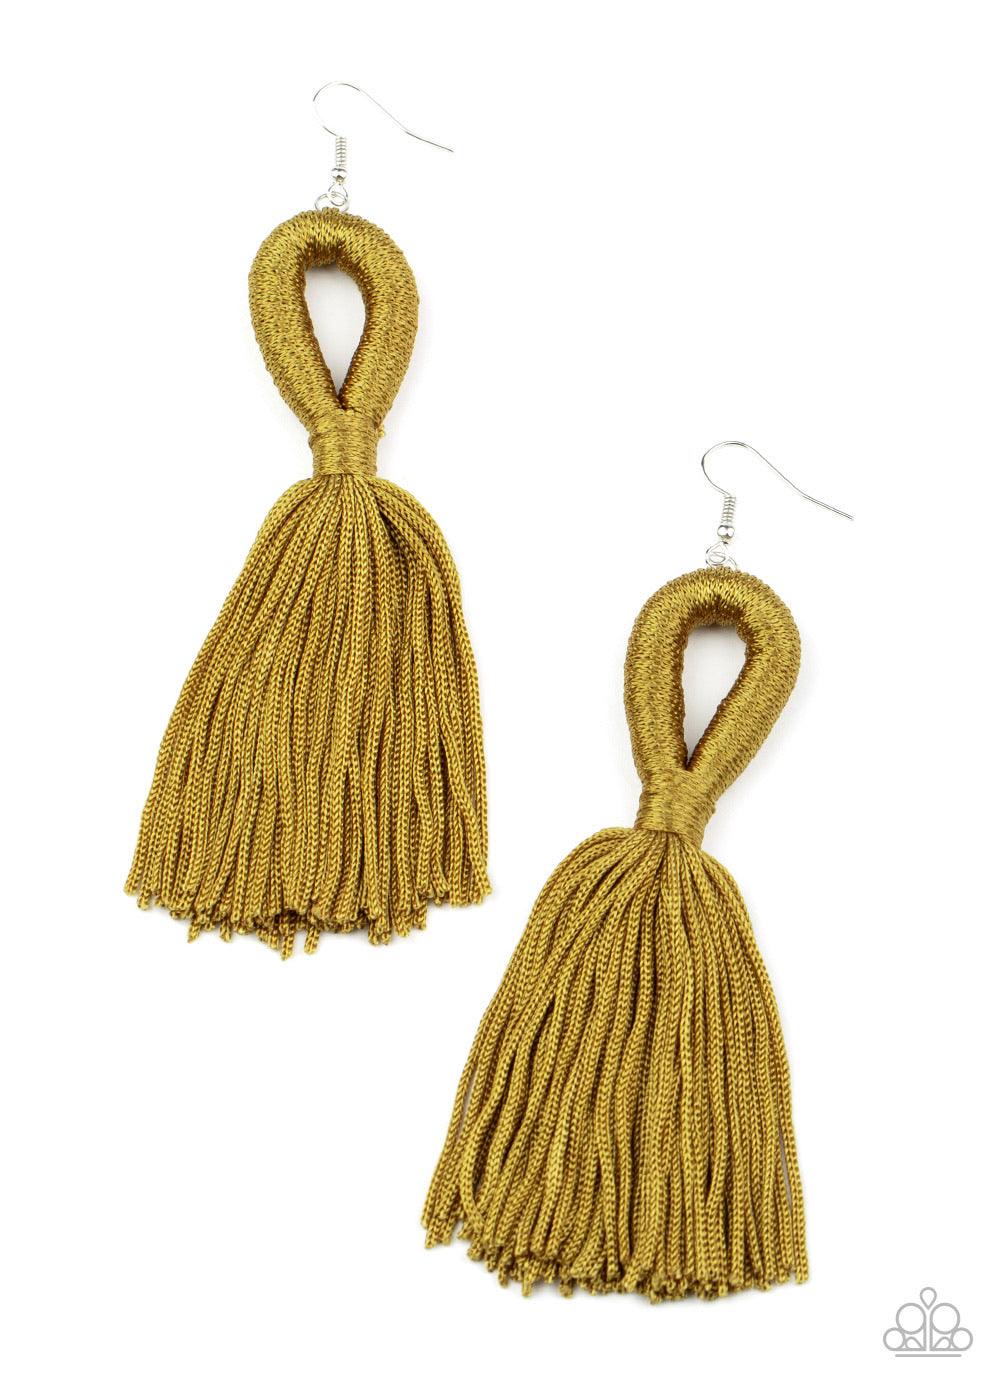 Paparazzi Accessories Tassels And Tiaras - Green Shiny Military Olive cording delicately loops and knots into an elegant tassel. Earring attaches to a standard fishhook fitting. Sold as one pair of earrings. This piece was featured as part of our Fall Tra